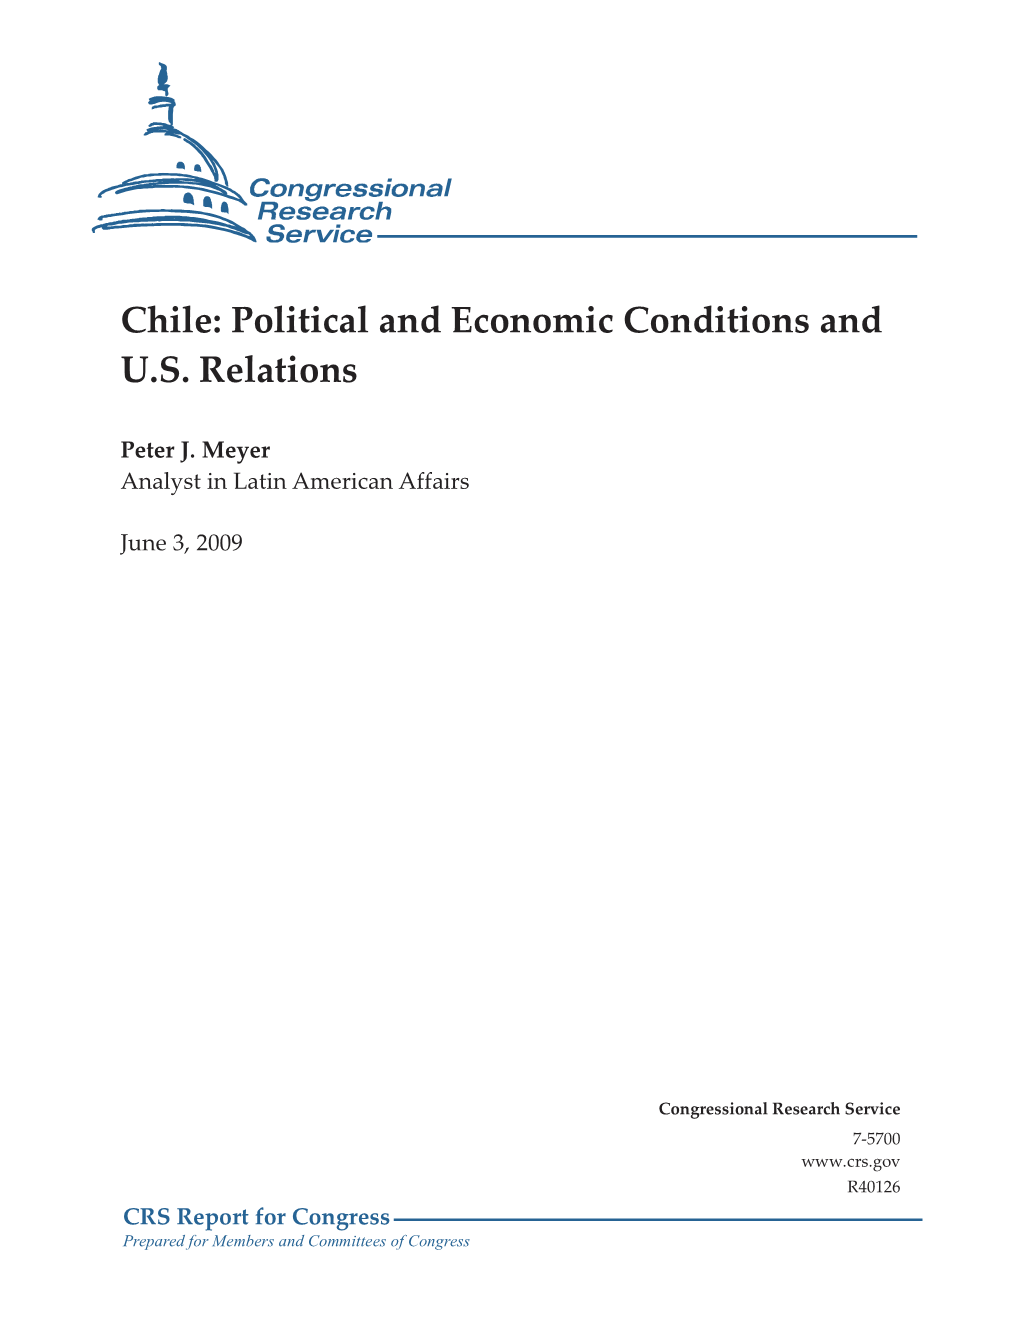 Chile: Political and Economic Conditions and U.S